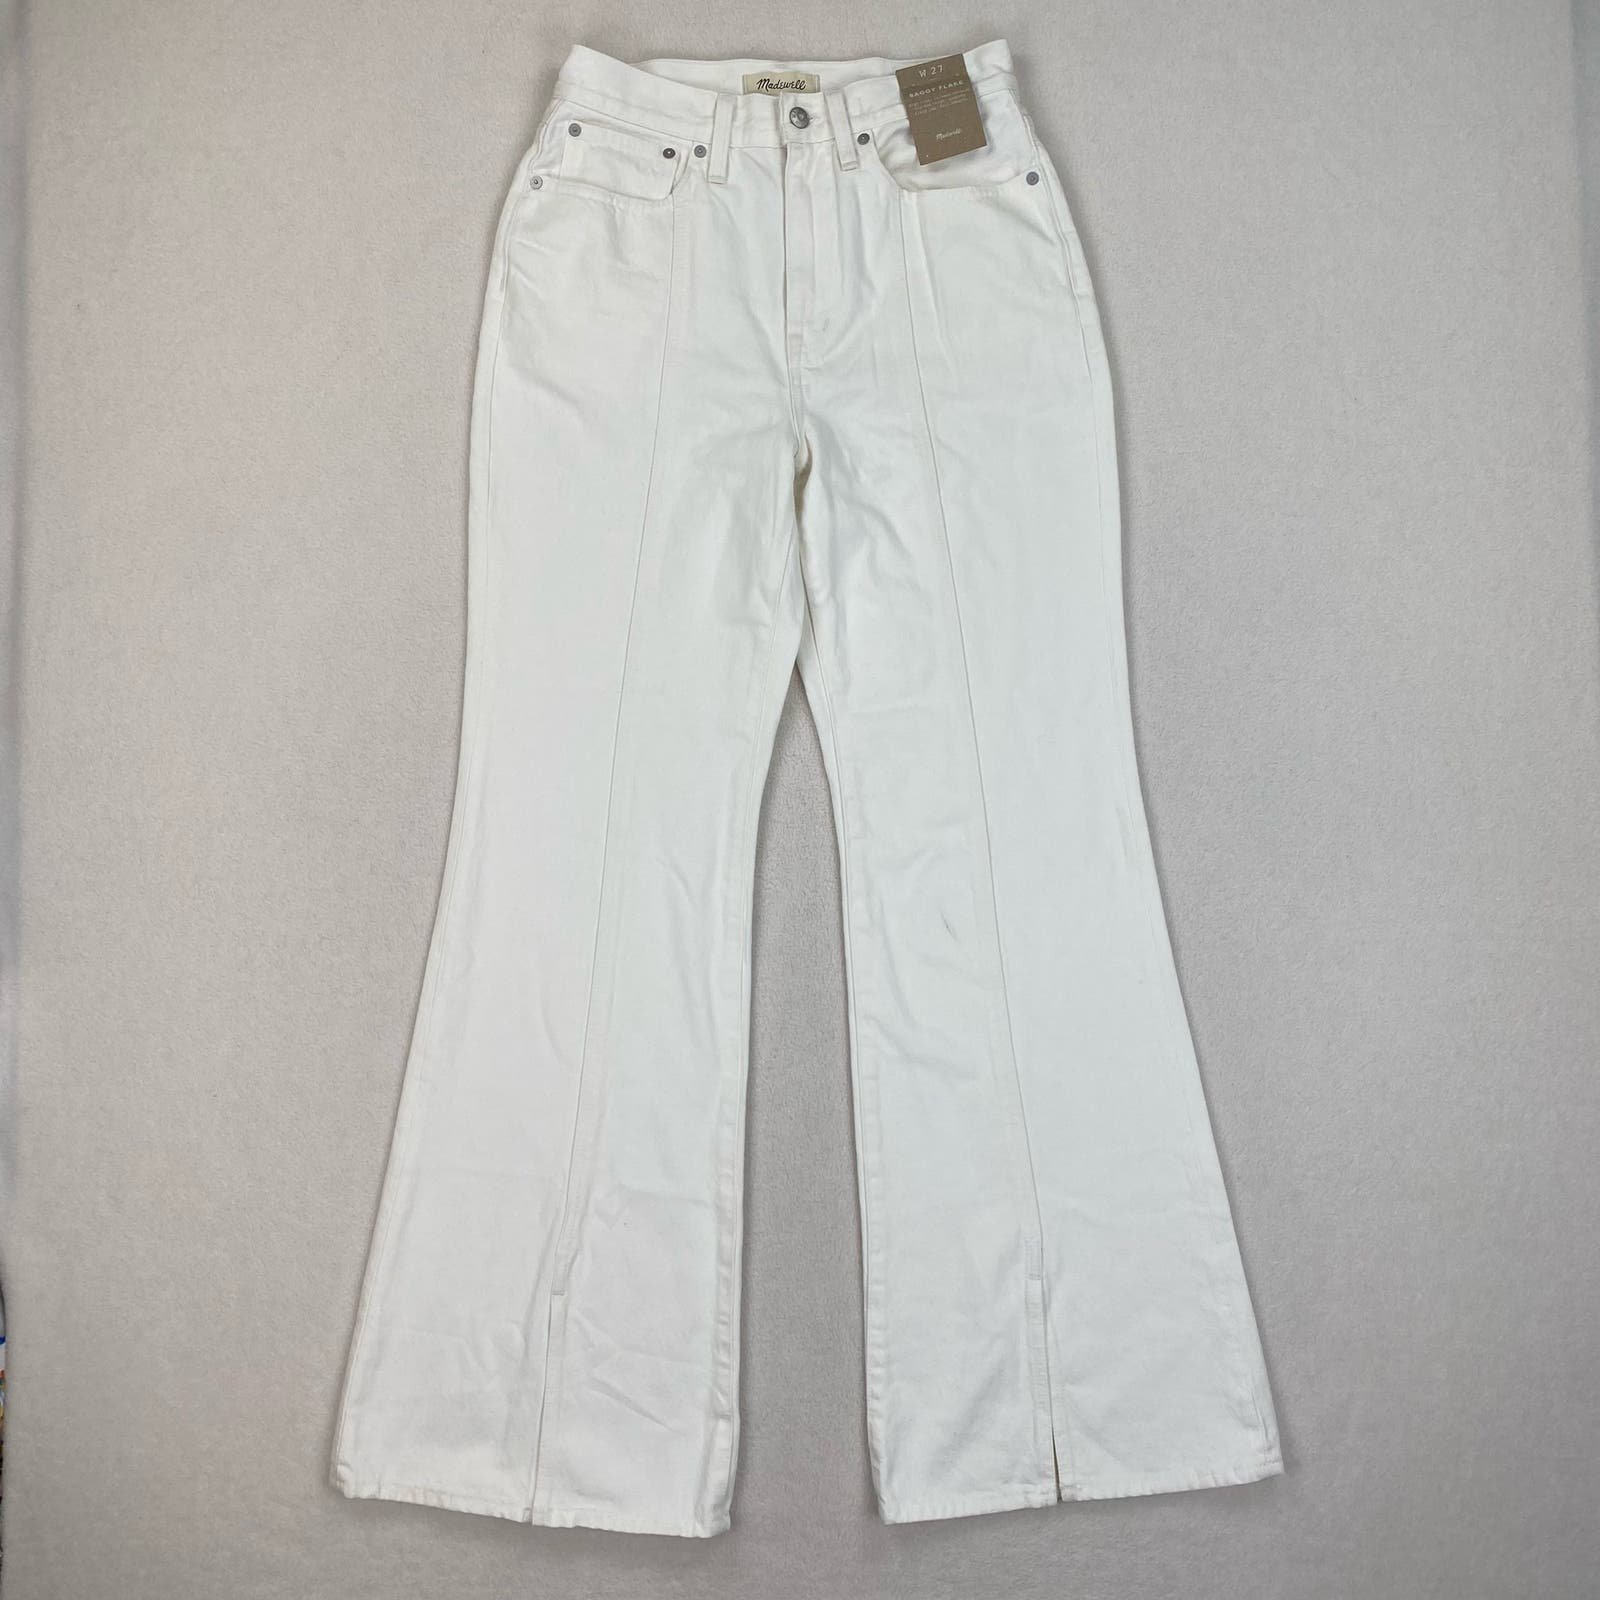 Amazing Madewell Jeans Size 27 White Baggy Flare Loose 